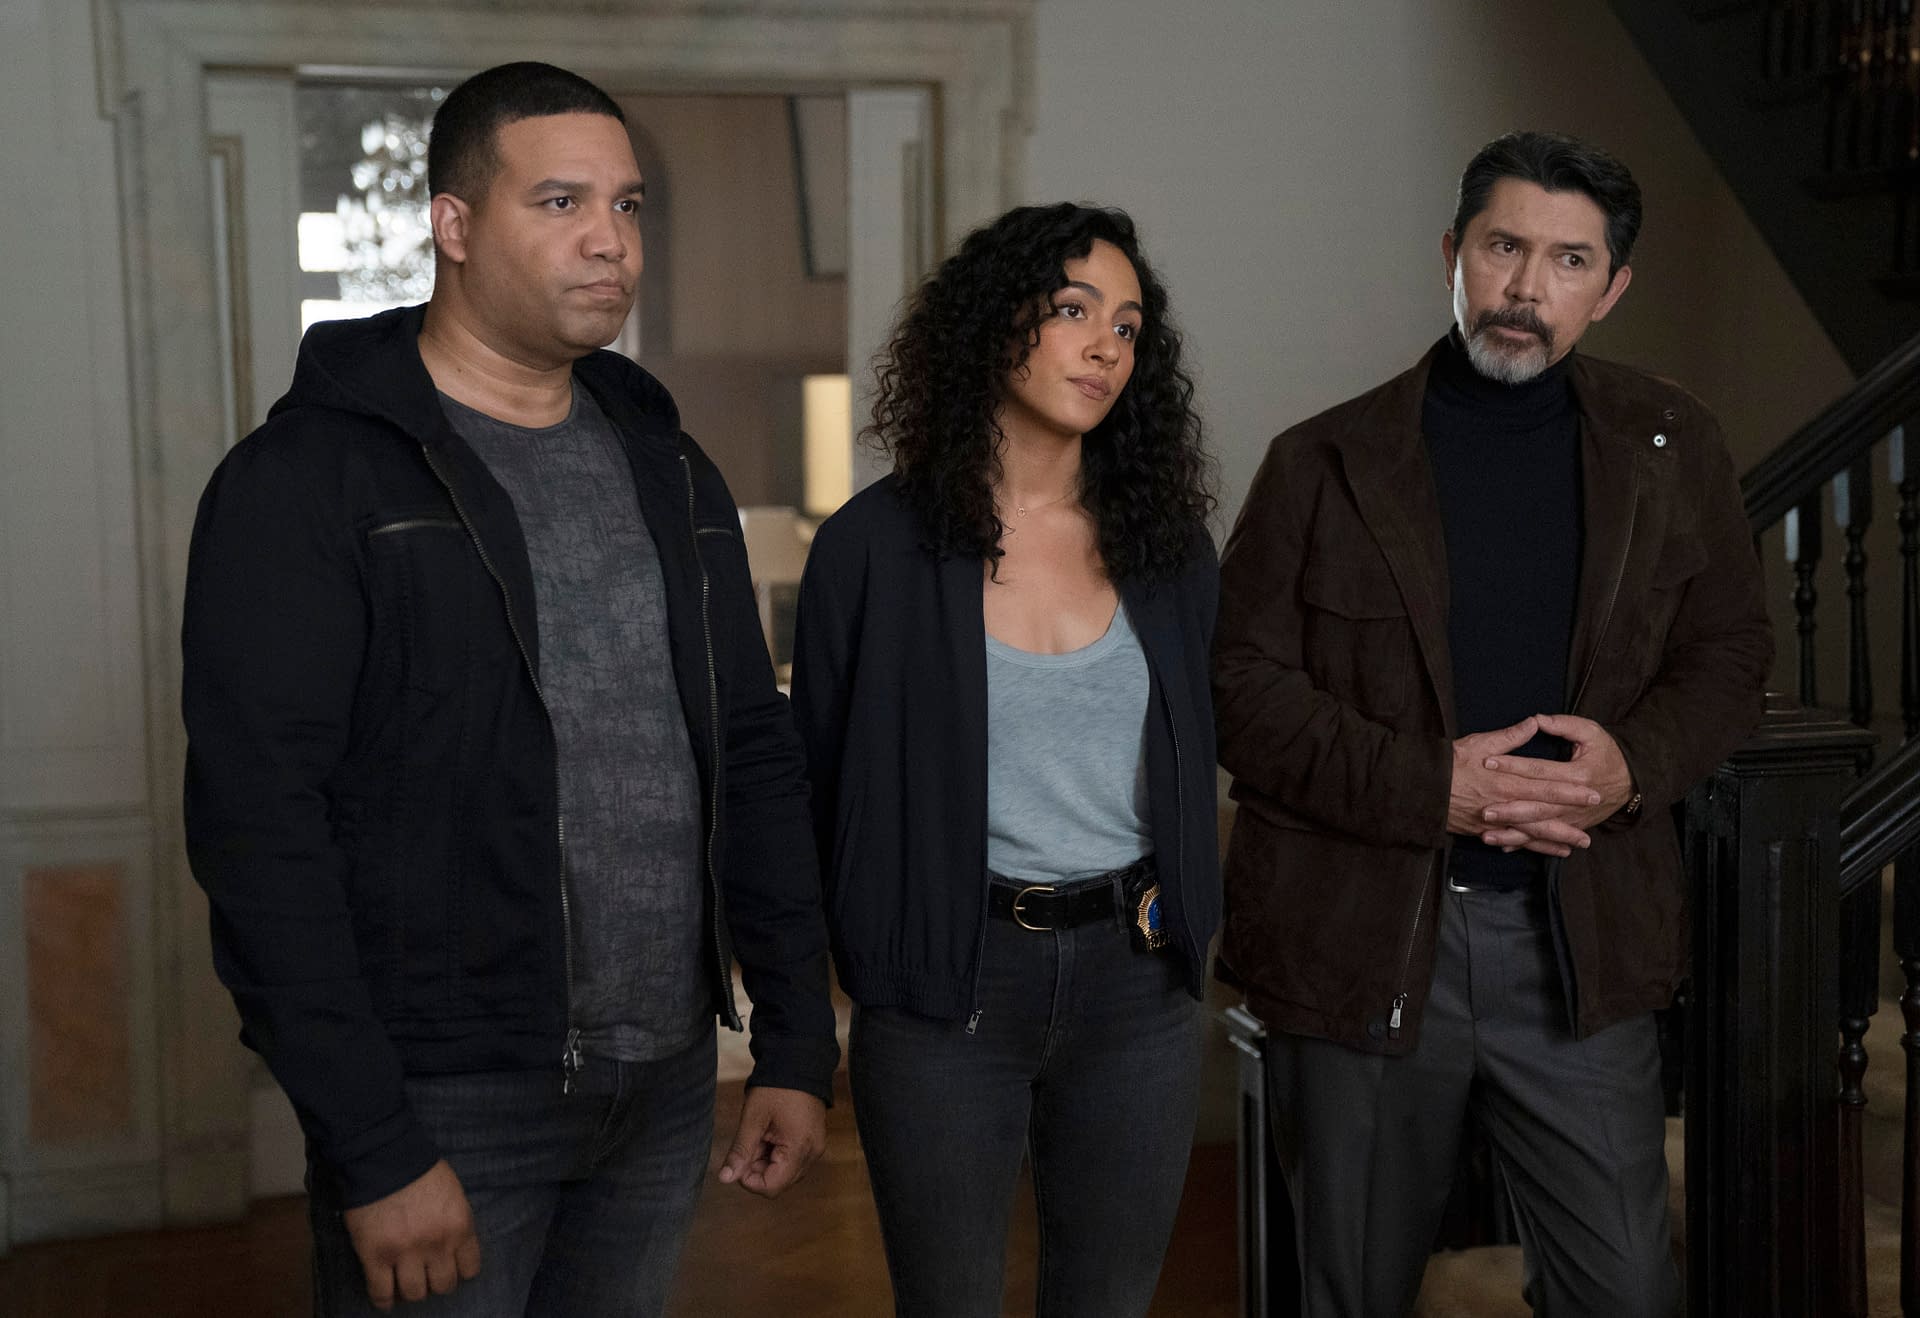 "Prodigal Son": Nothing Screams "Father/Son Bonding" More Than Quadruple Homicide [PREVIEW]